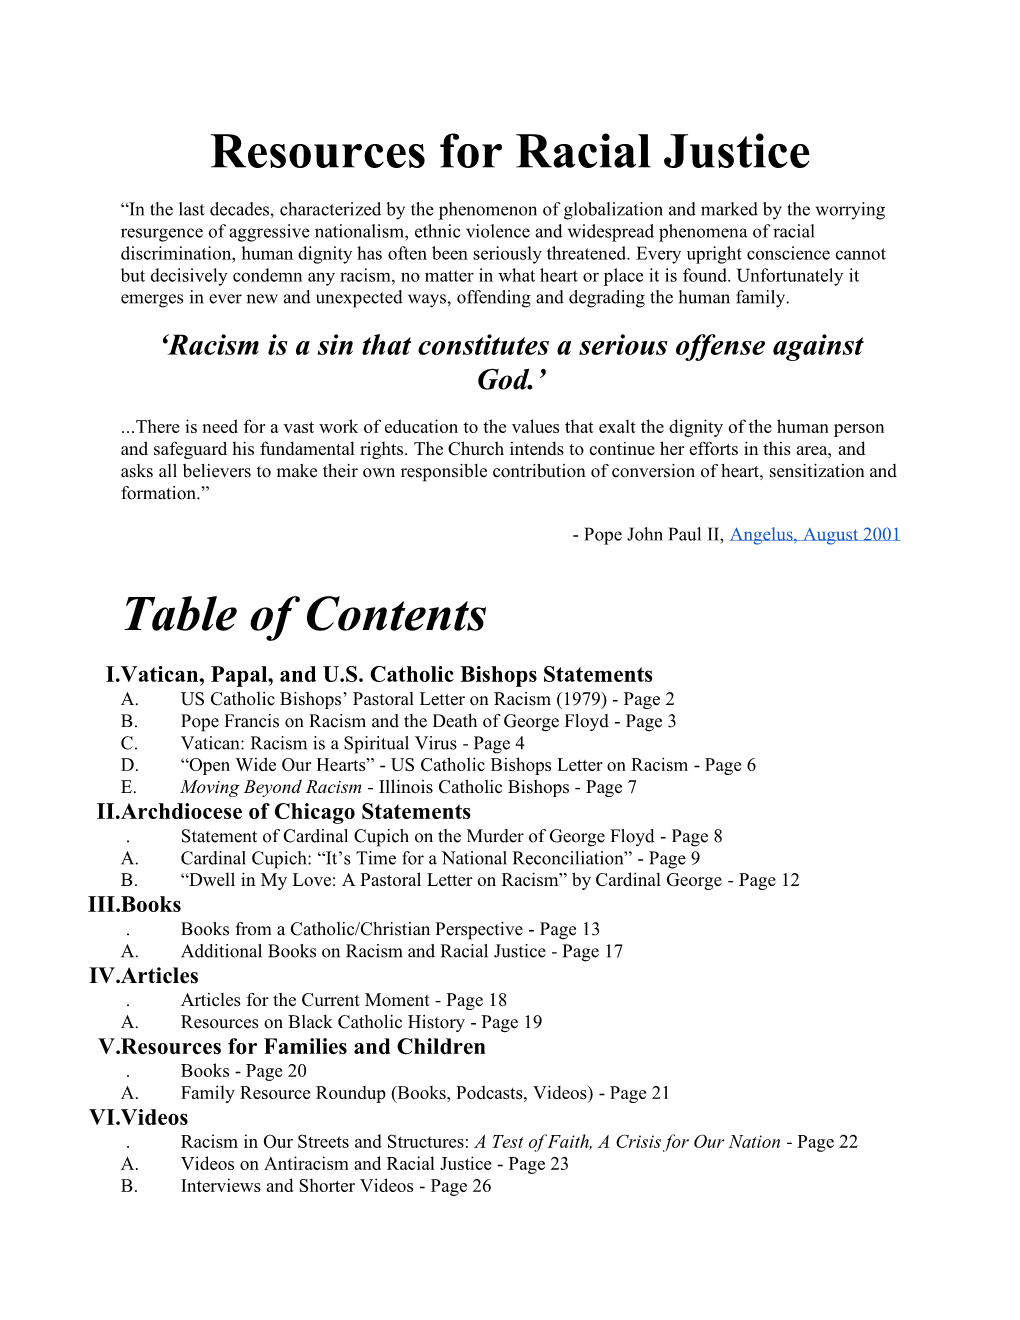 Resources for Racial Justice Table of Contents